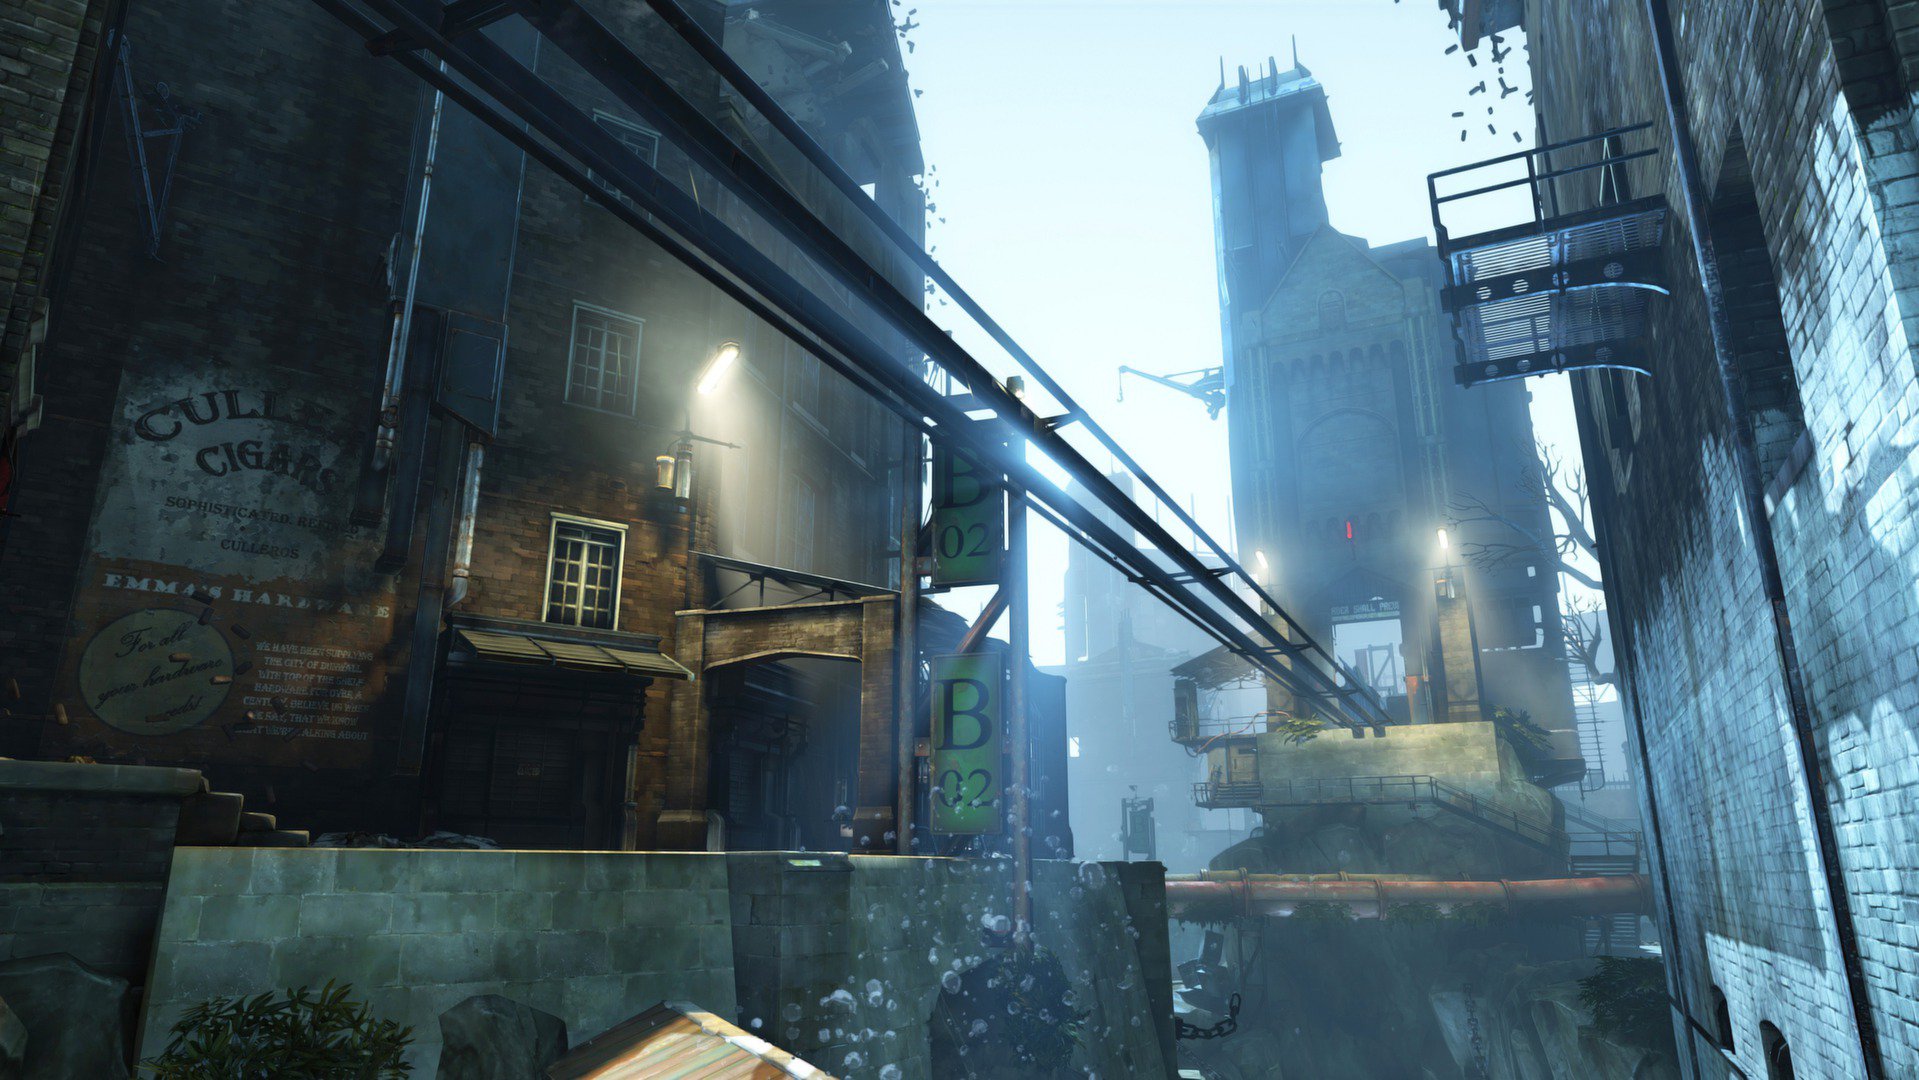 Dishonored Dunwall City Trials 6